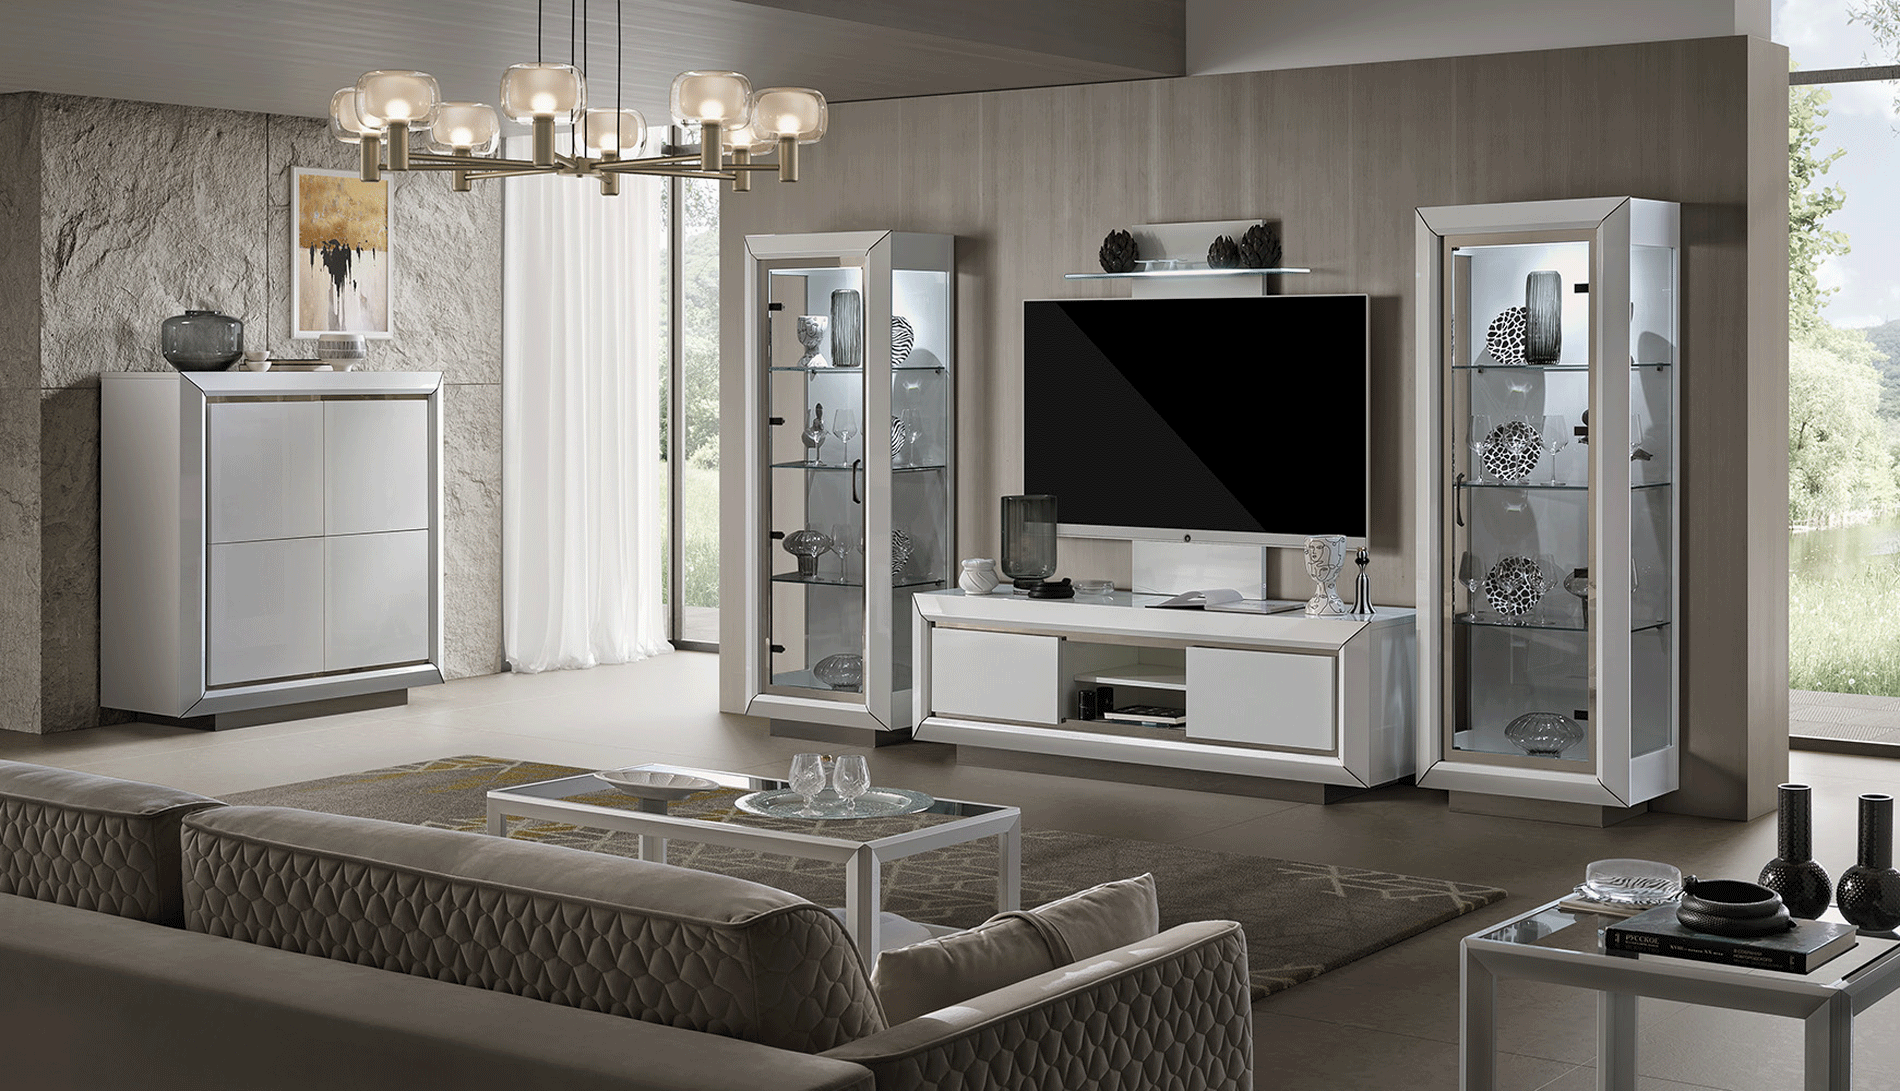 Brands Camel Classic Collection, Italy Elite WHITE Entertainment center Additional items